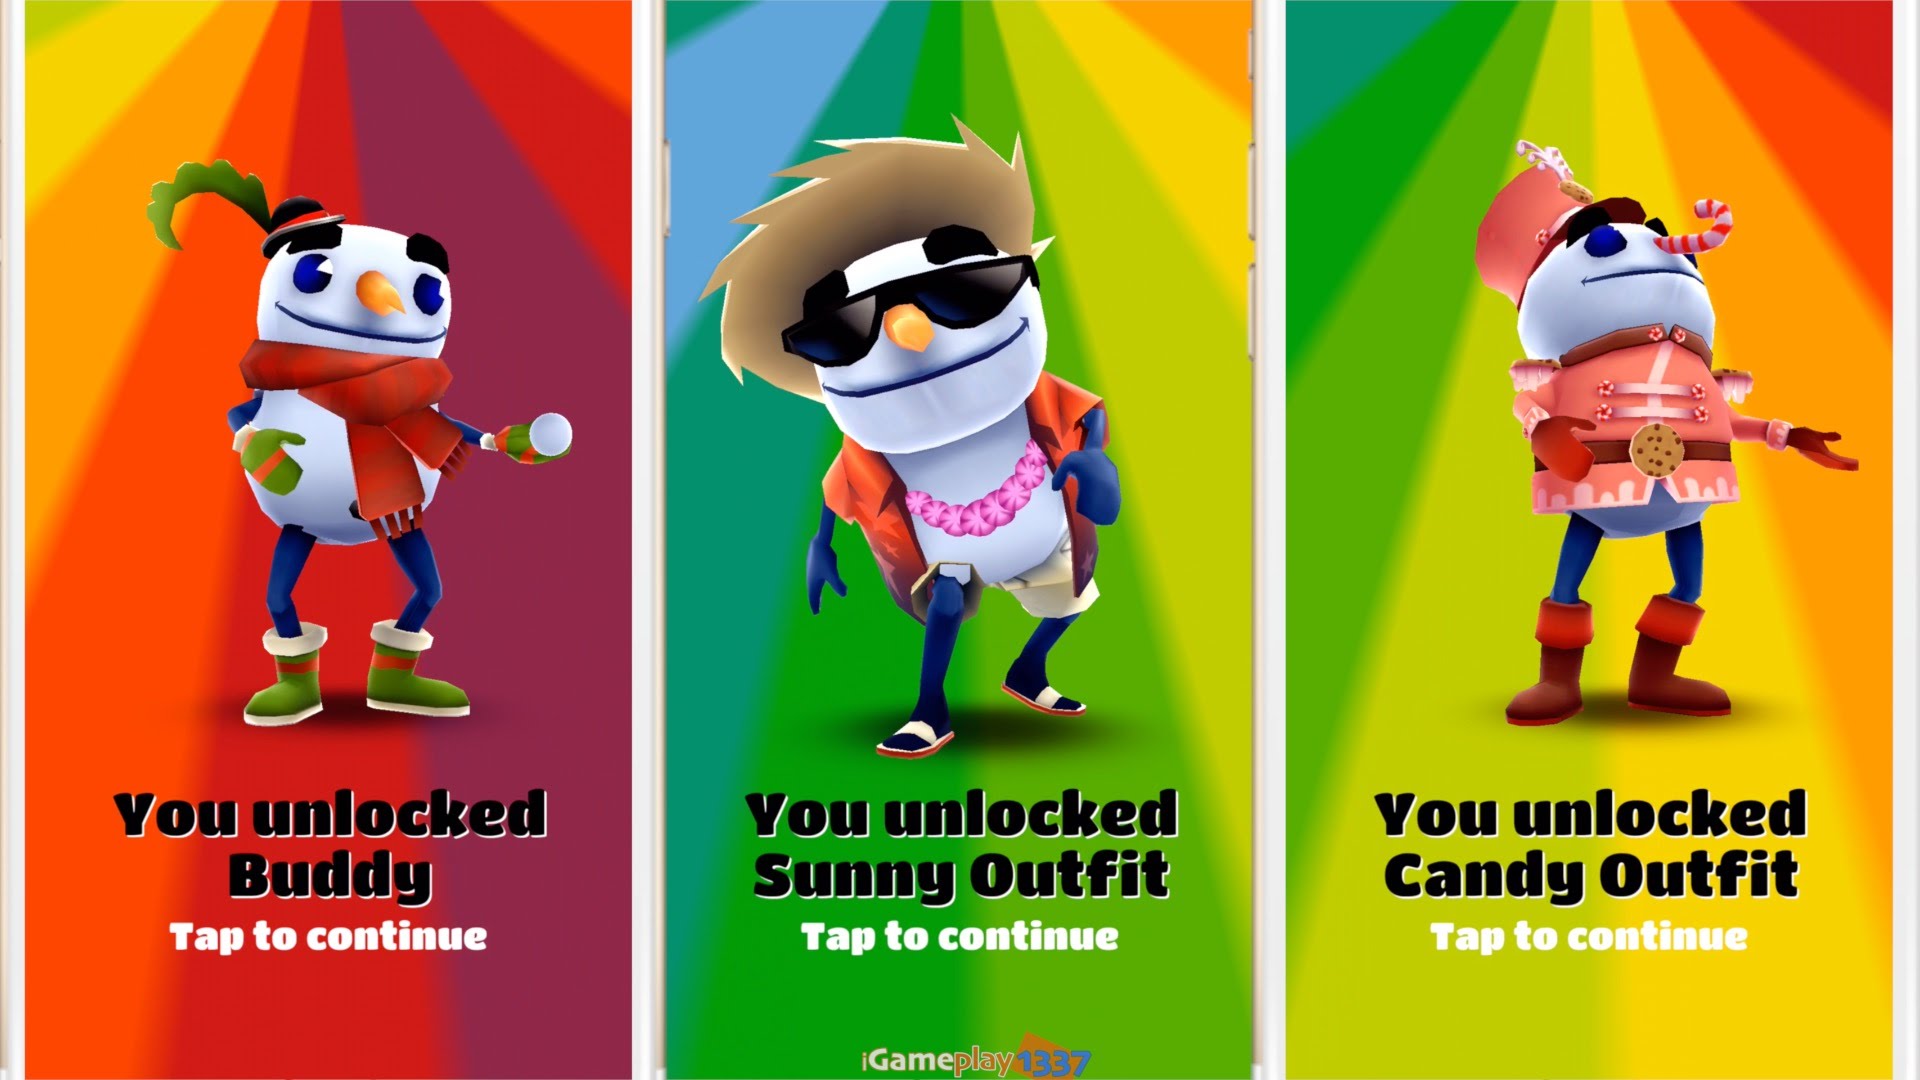 Subway Surfers - BUDDY vs SUNNY vs CANDY Outfit - Gameplay - YouTube